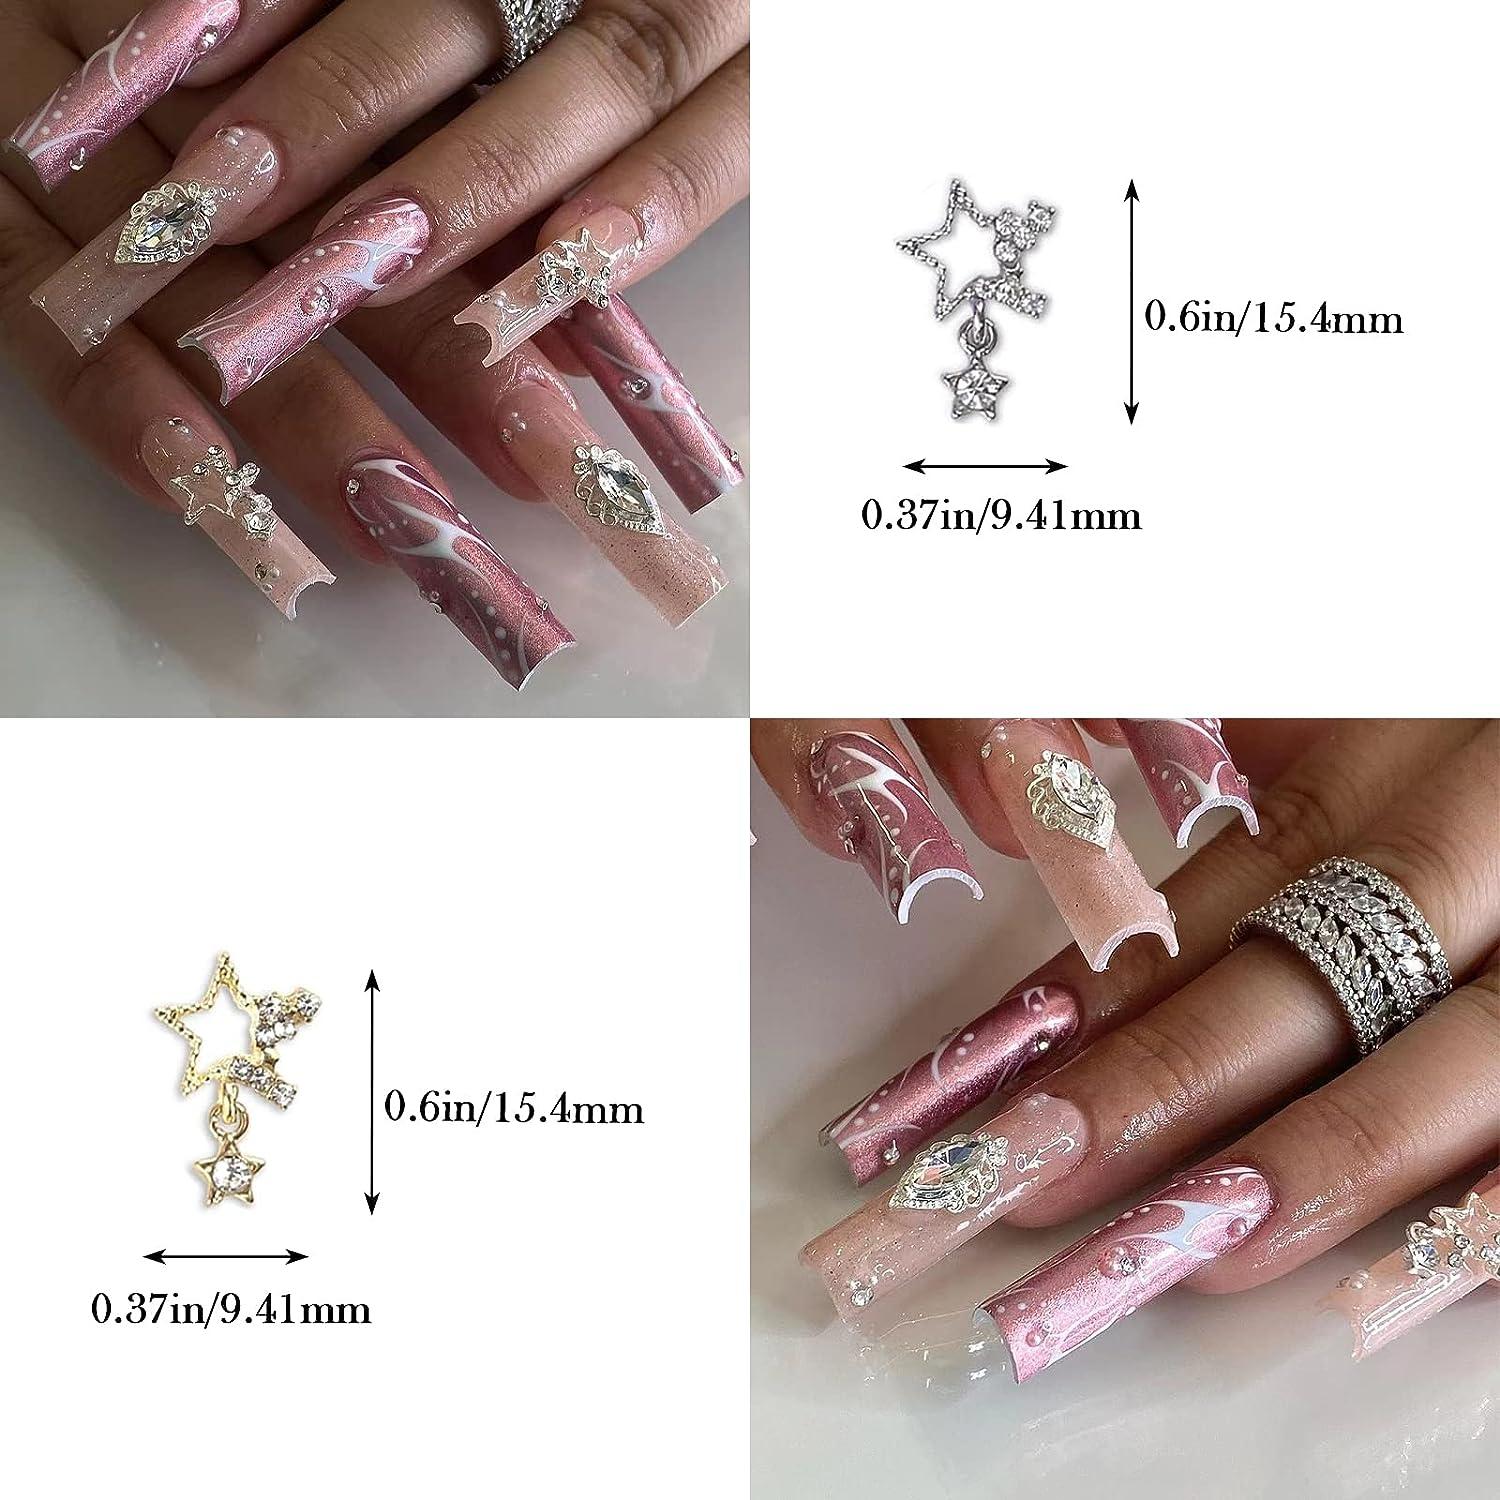 Kawaii Silver Gold Head Nail Charms For Acrylic Nails 3D Pink Nail Art  Rhinestones Jewelry Nail Gems Metal Nail Decorations For Women Girls Nail  Accessories Supplies From Misssecret, $0.15